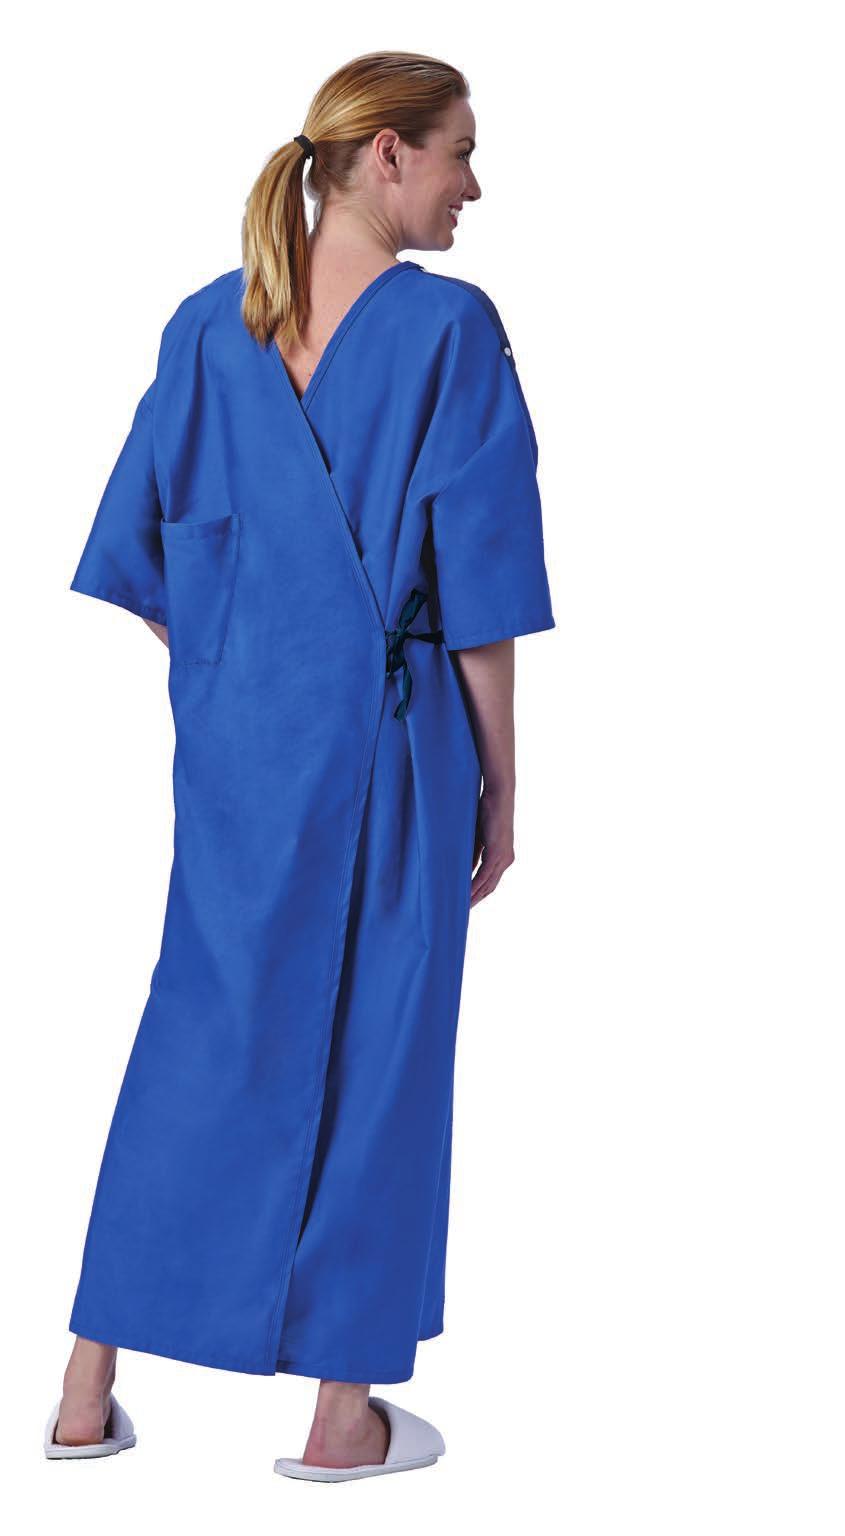 Unisex Examination Apparel Blueberry 630* Blueberry 752* 3 Armhole Wrap-a-Gown Longer 51 length No ties,